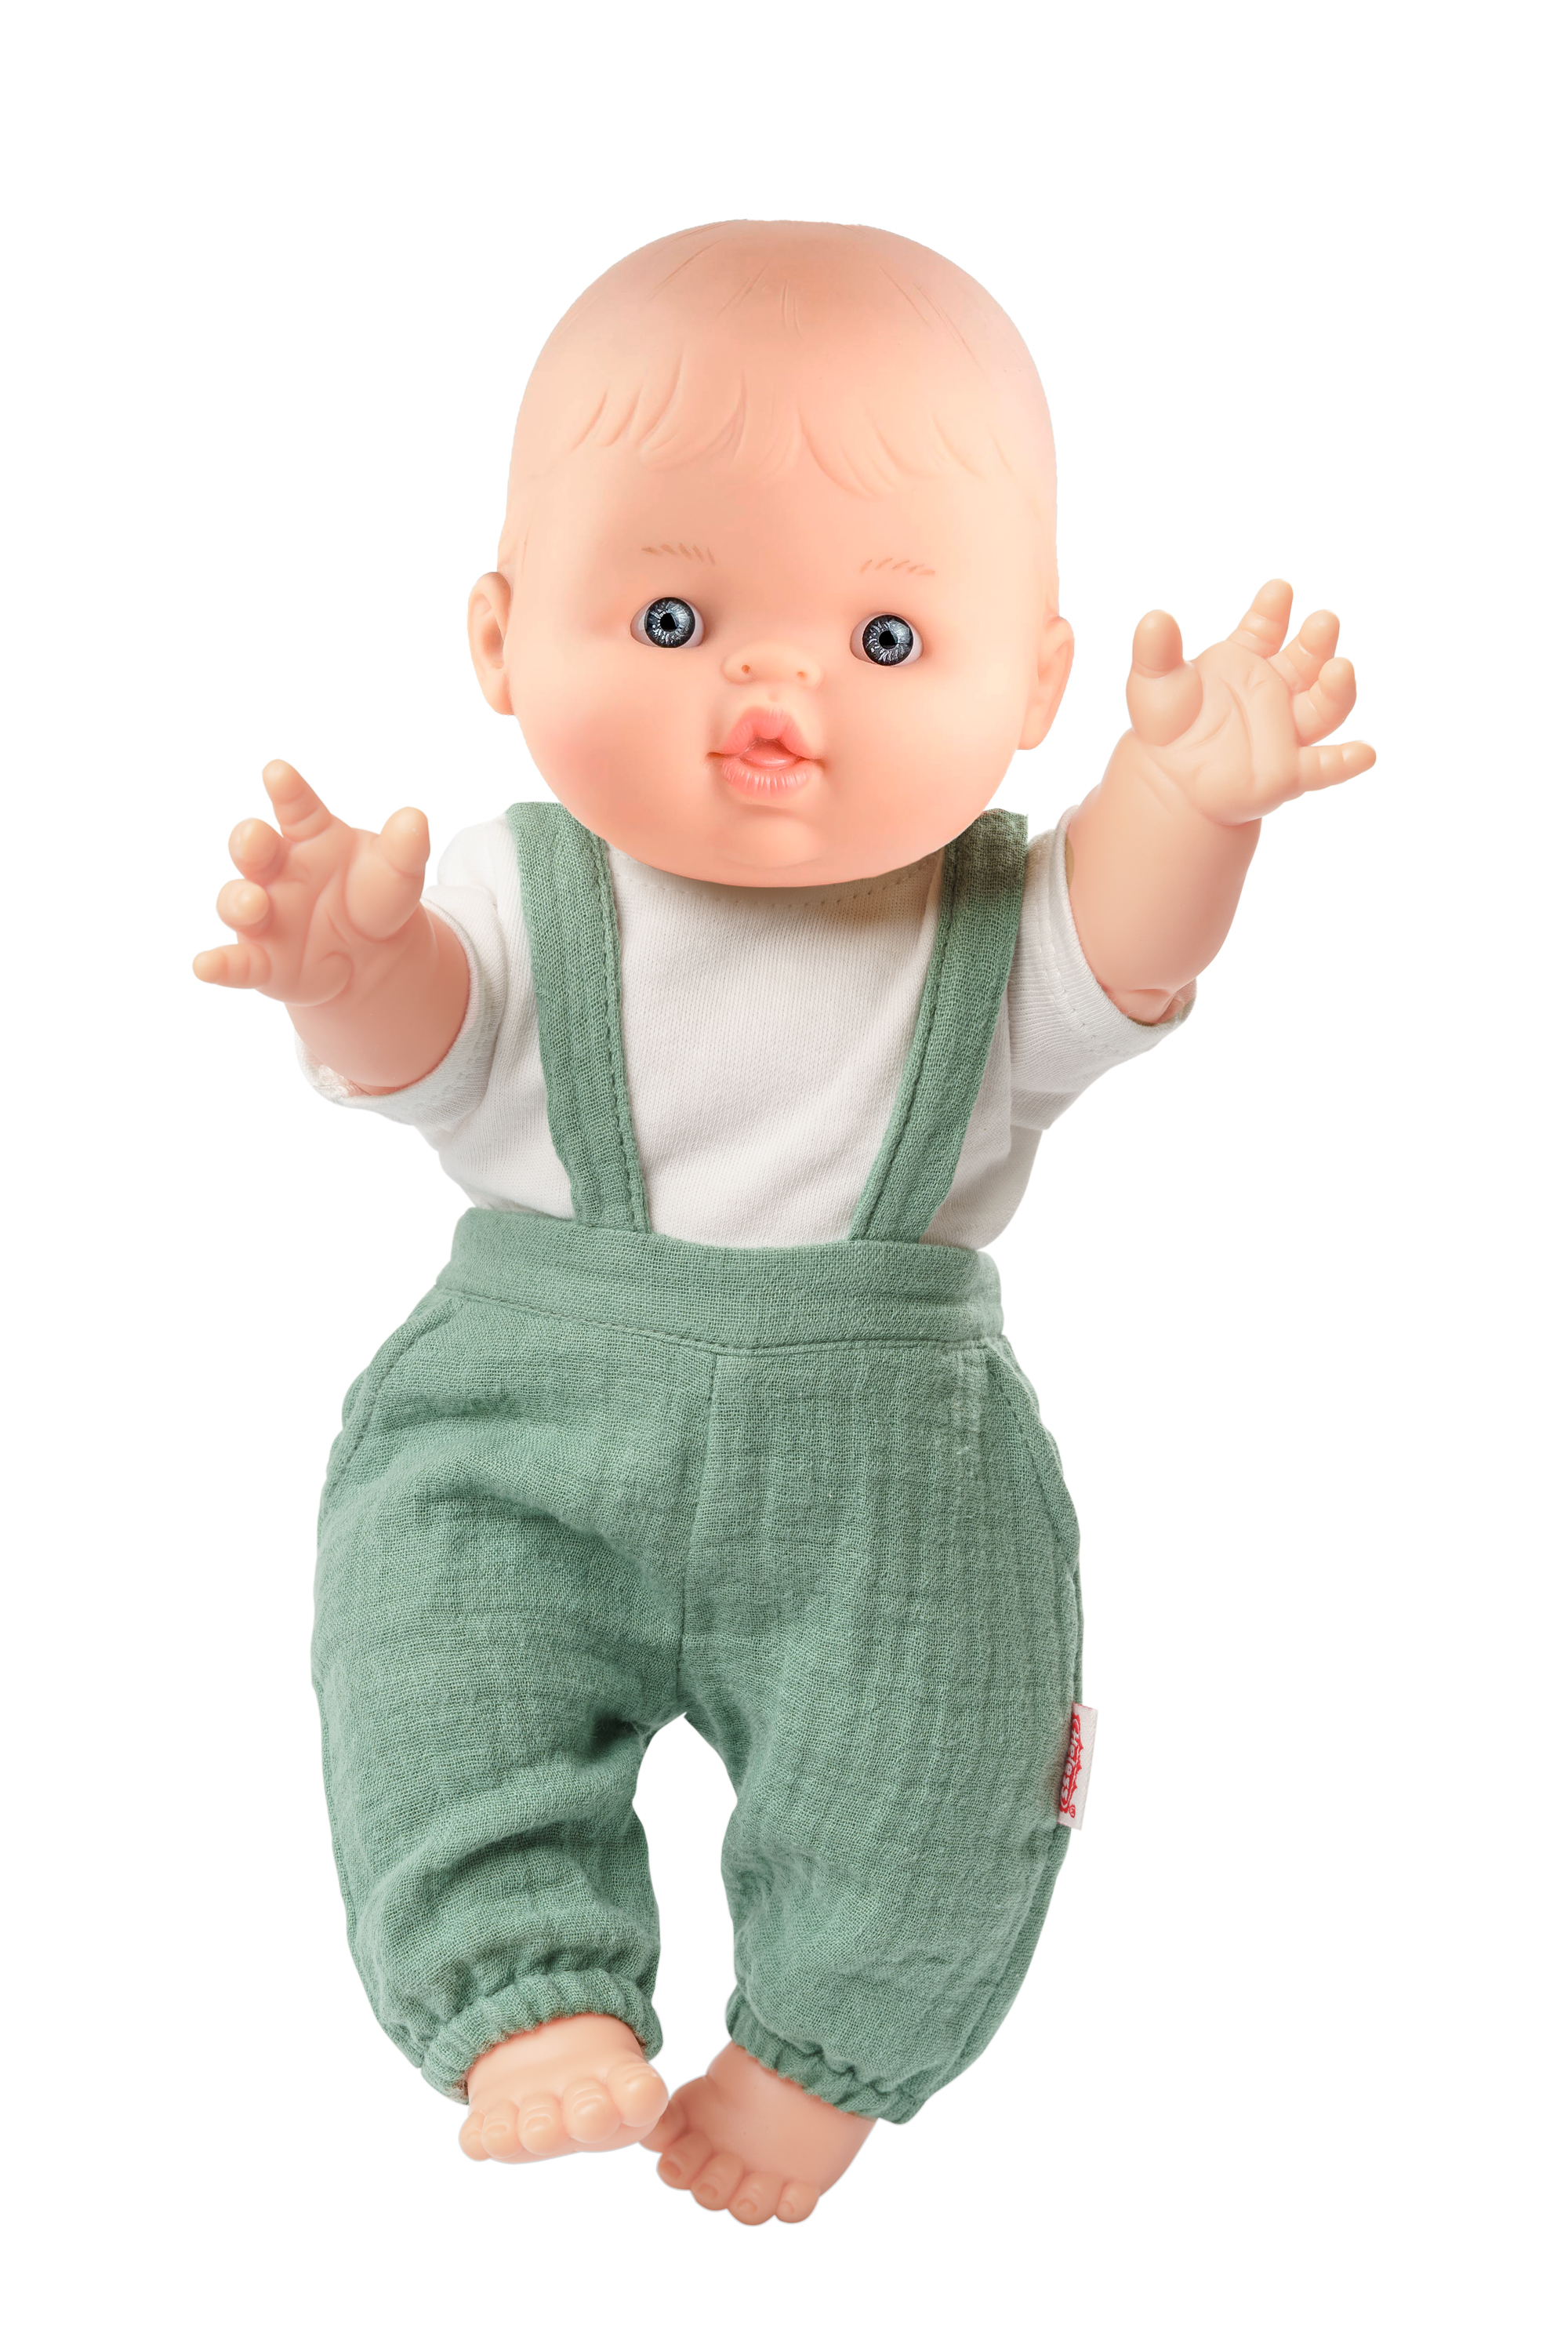 Set: Boy doll with organic dungarees, sage green, 34 cm